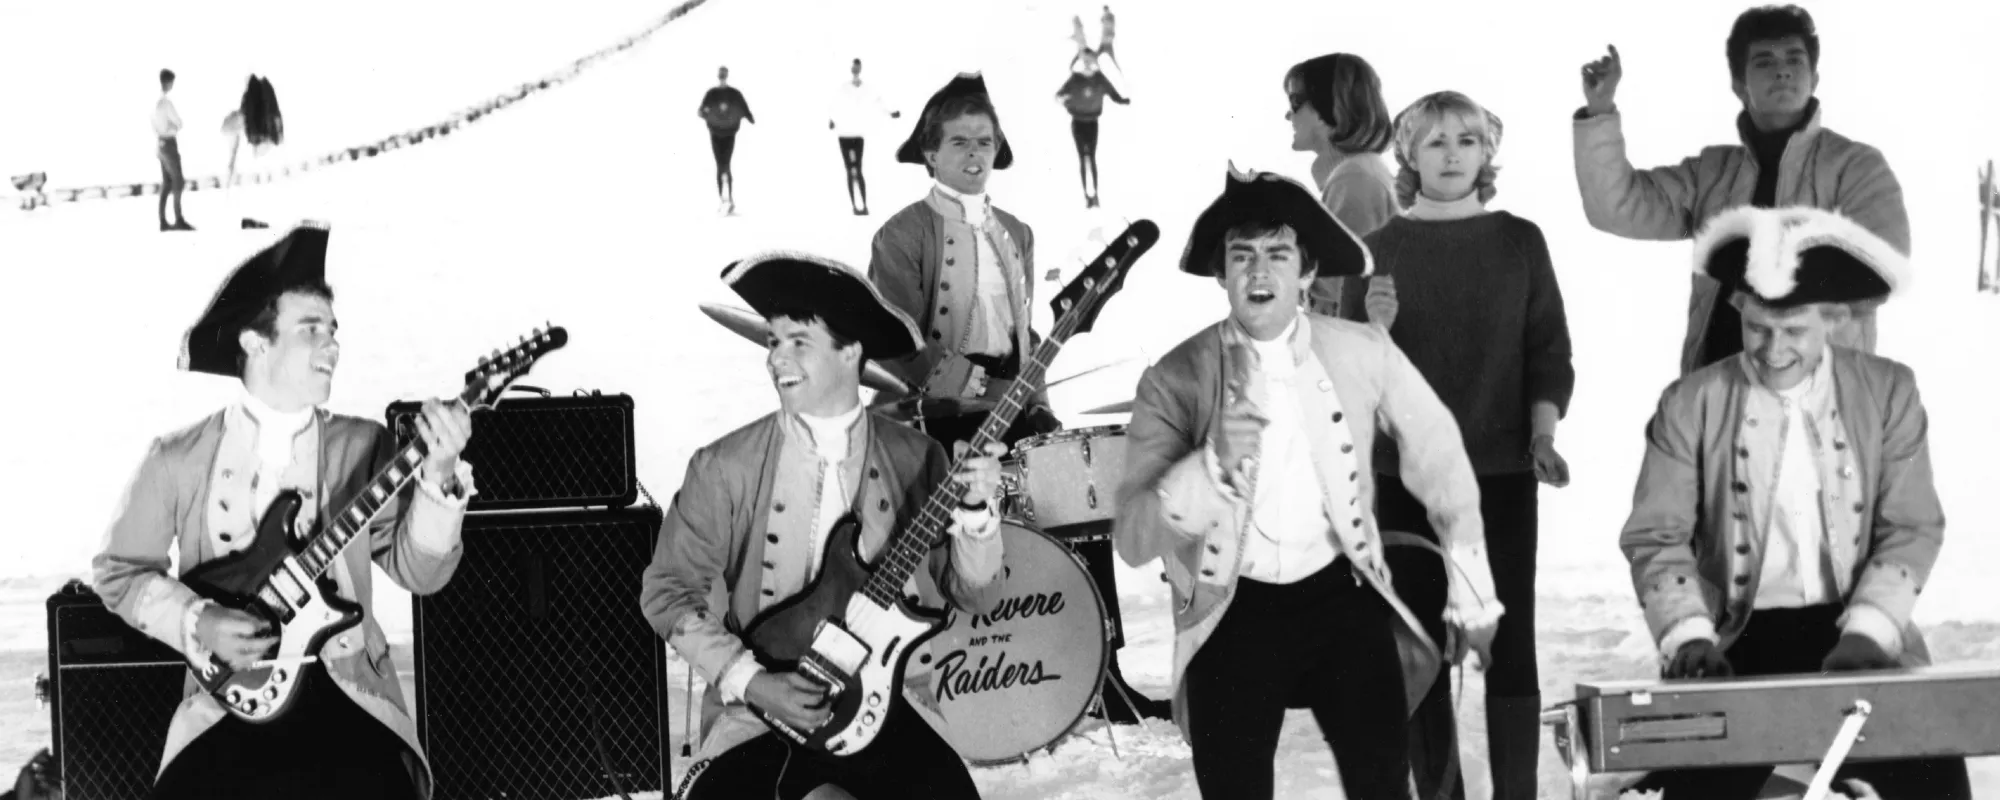 3 Songs You Didn’t Know Mark Lindsay Wrote for Paul Revere & the Raiders